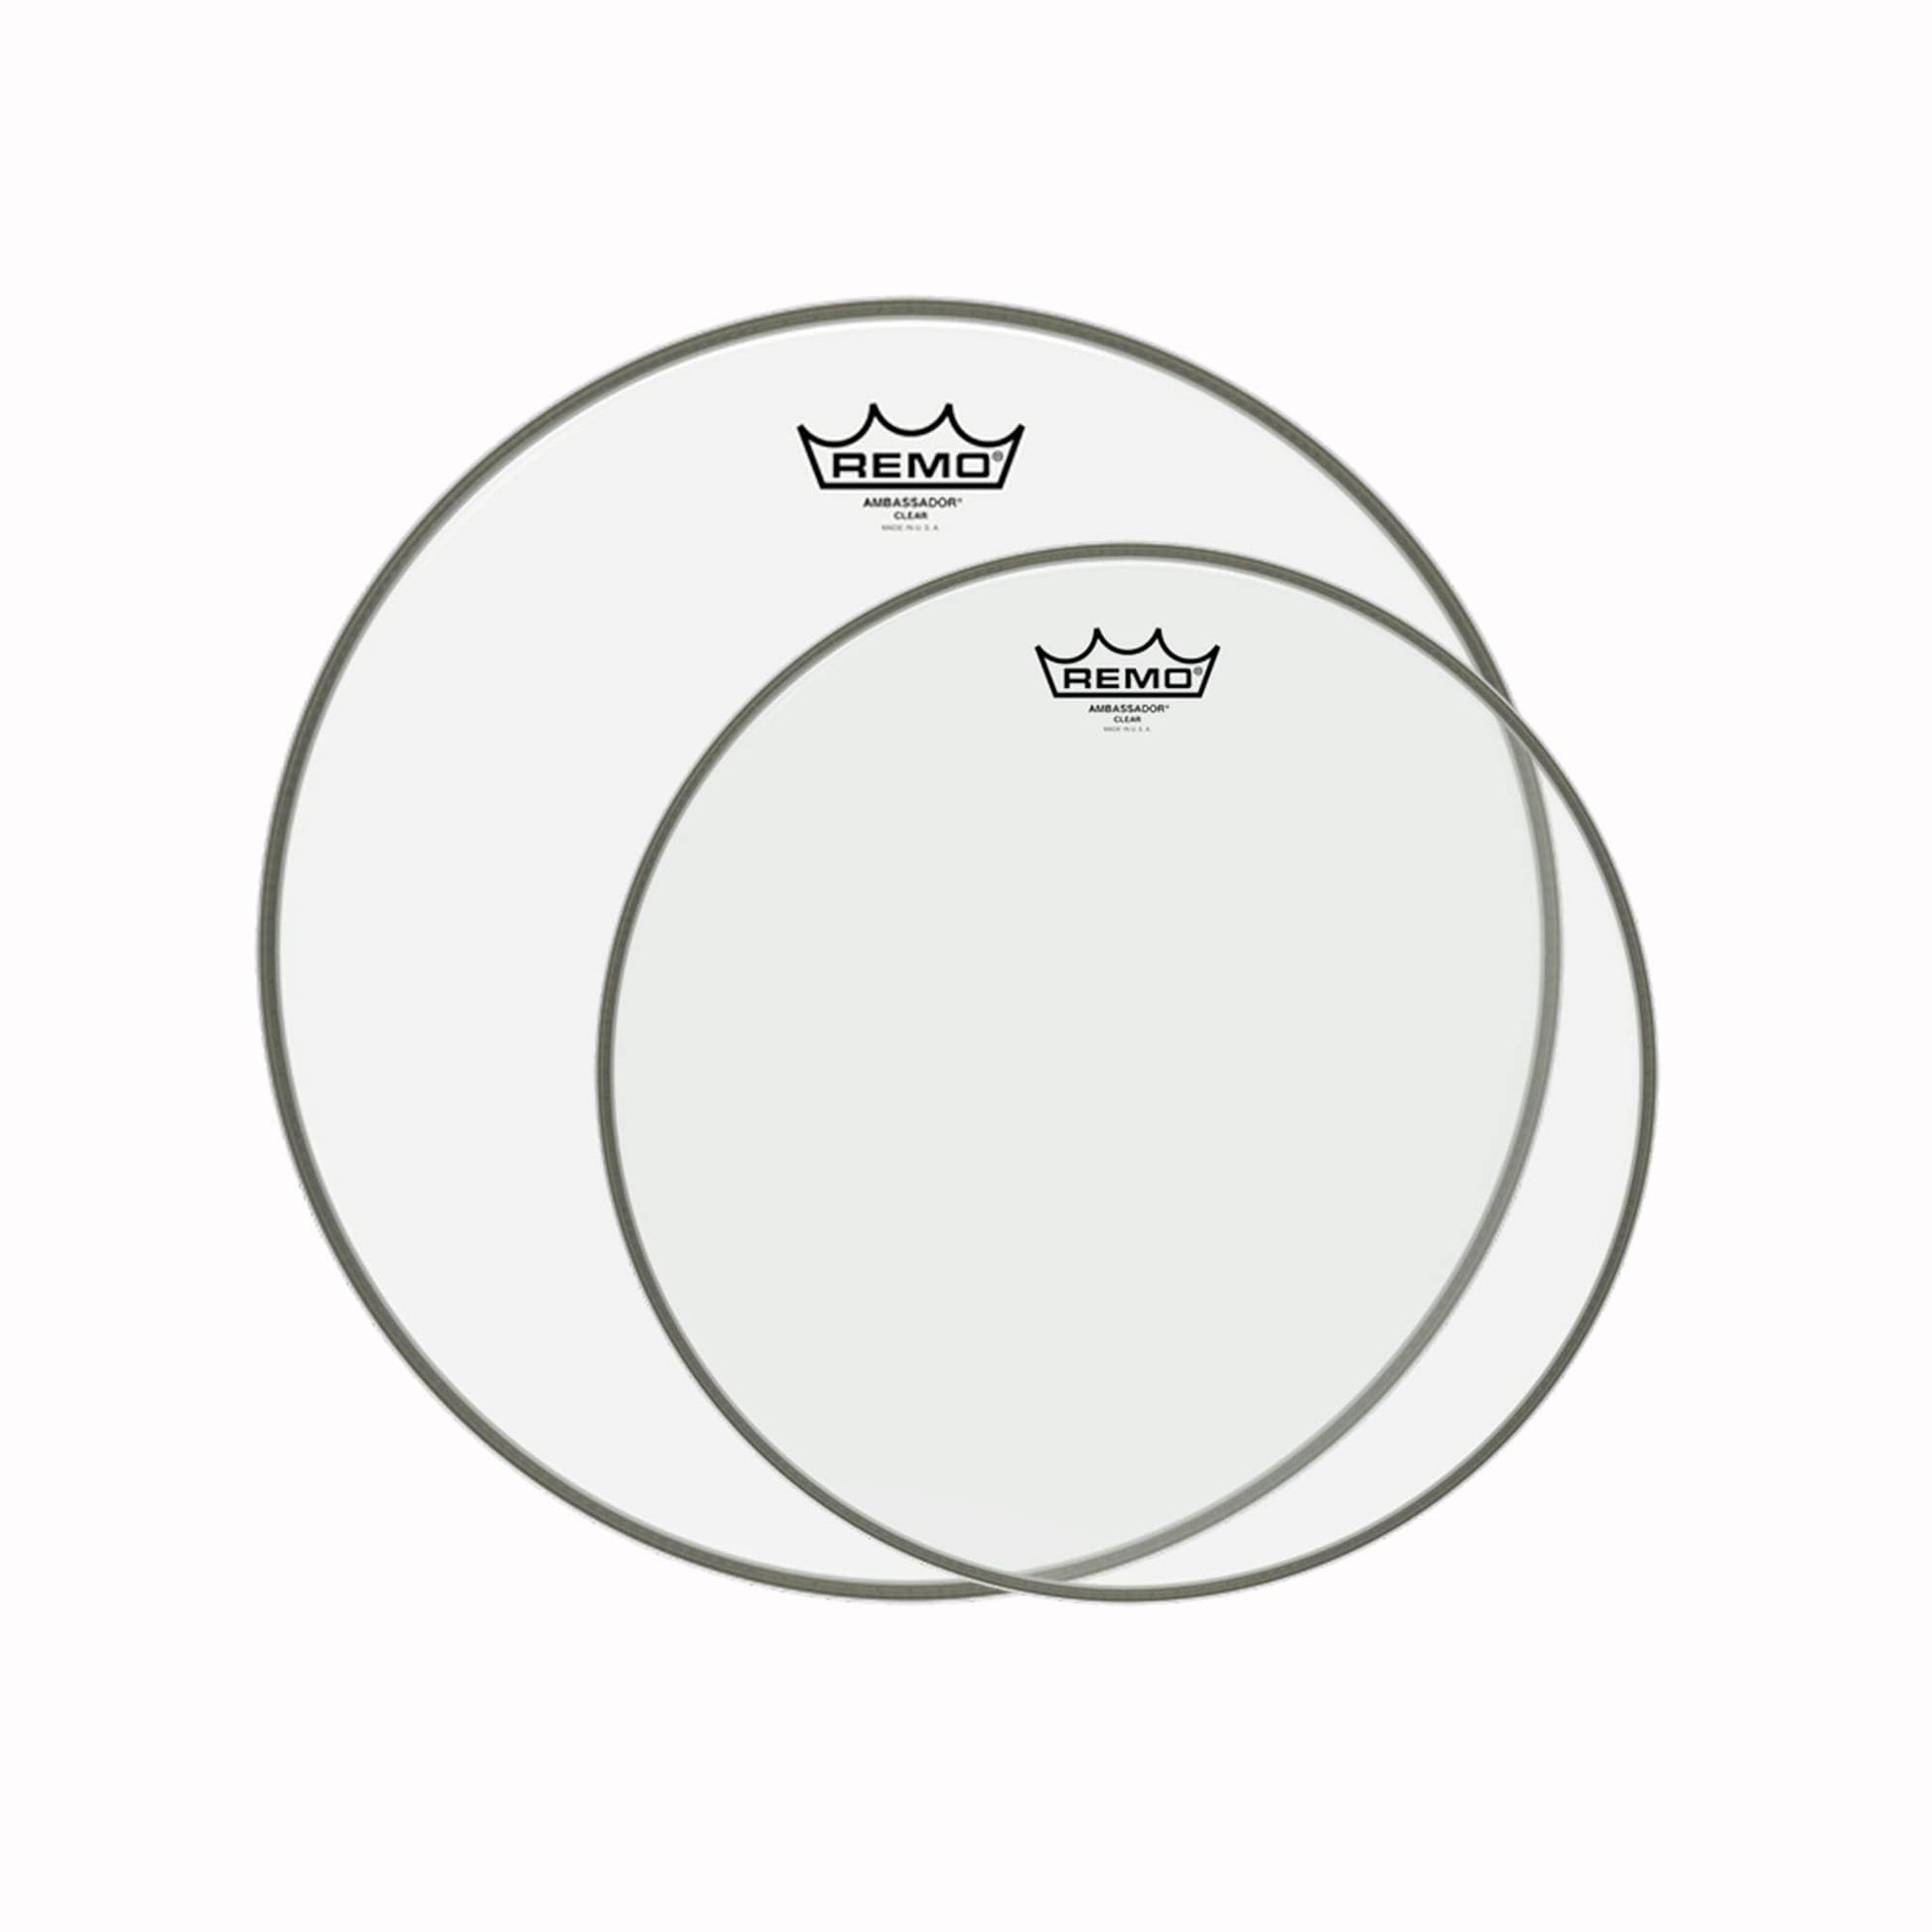 Remo 13/16" Ambassador Clear Drumhead (2 Pack Bundle) Drums and Percussion / Parts and Accessories / Heads